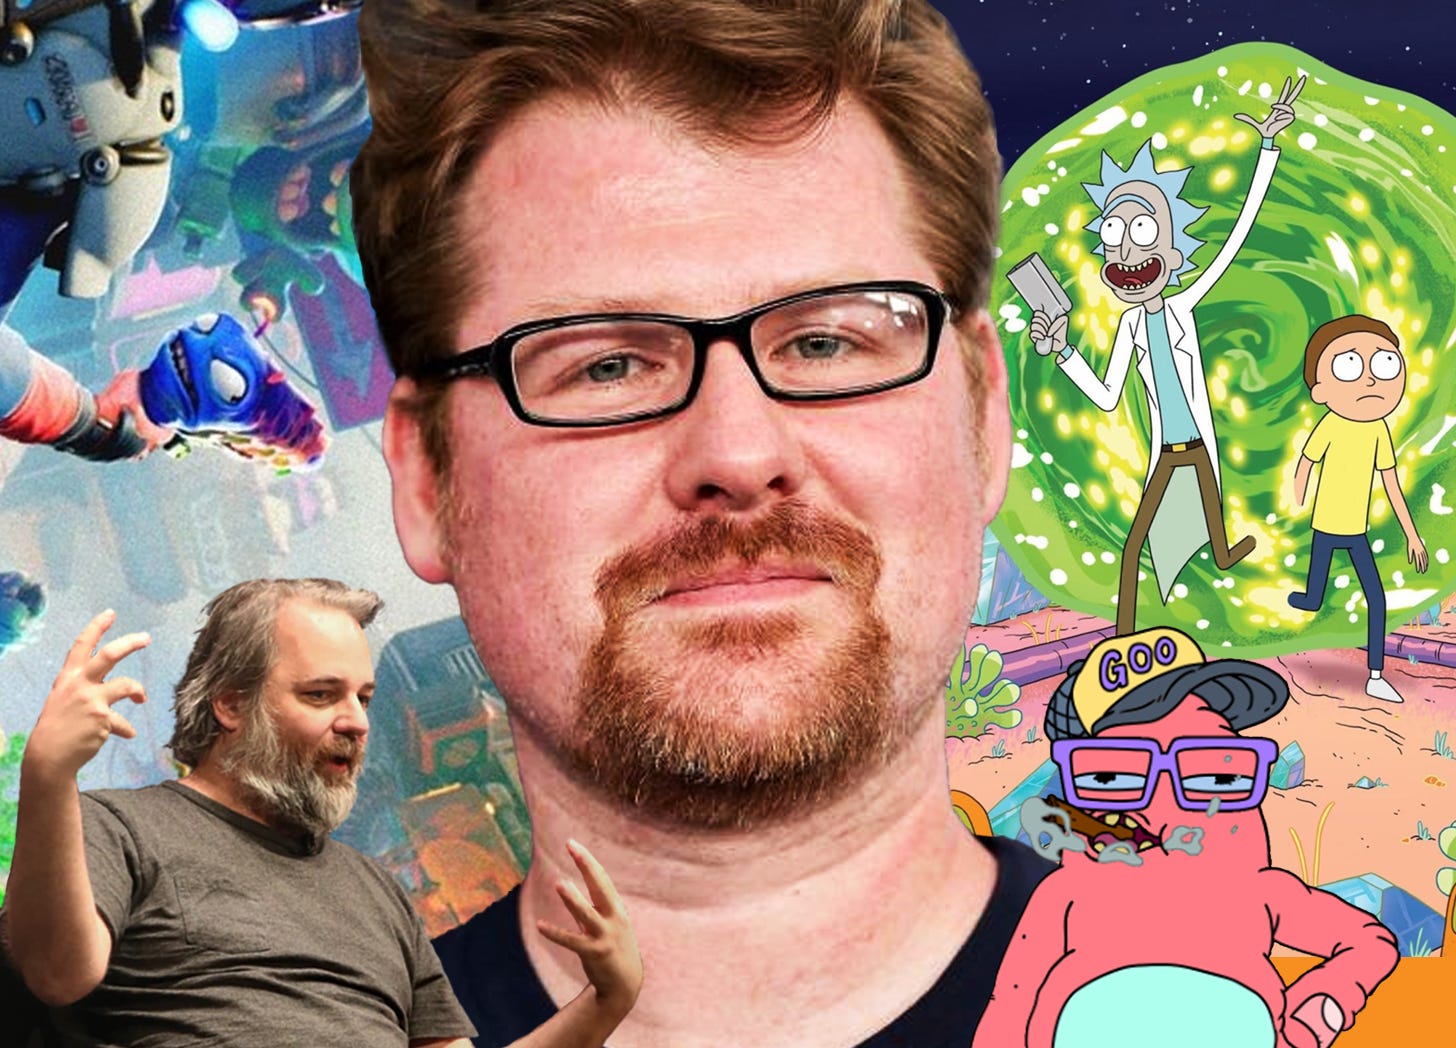 Schoolgirl Anal Bbc - The Sexual Assault and Abuse Allegations Against Justin Roiland